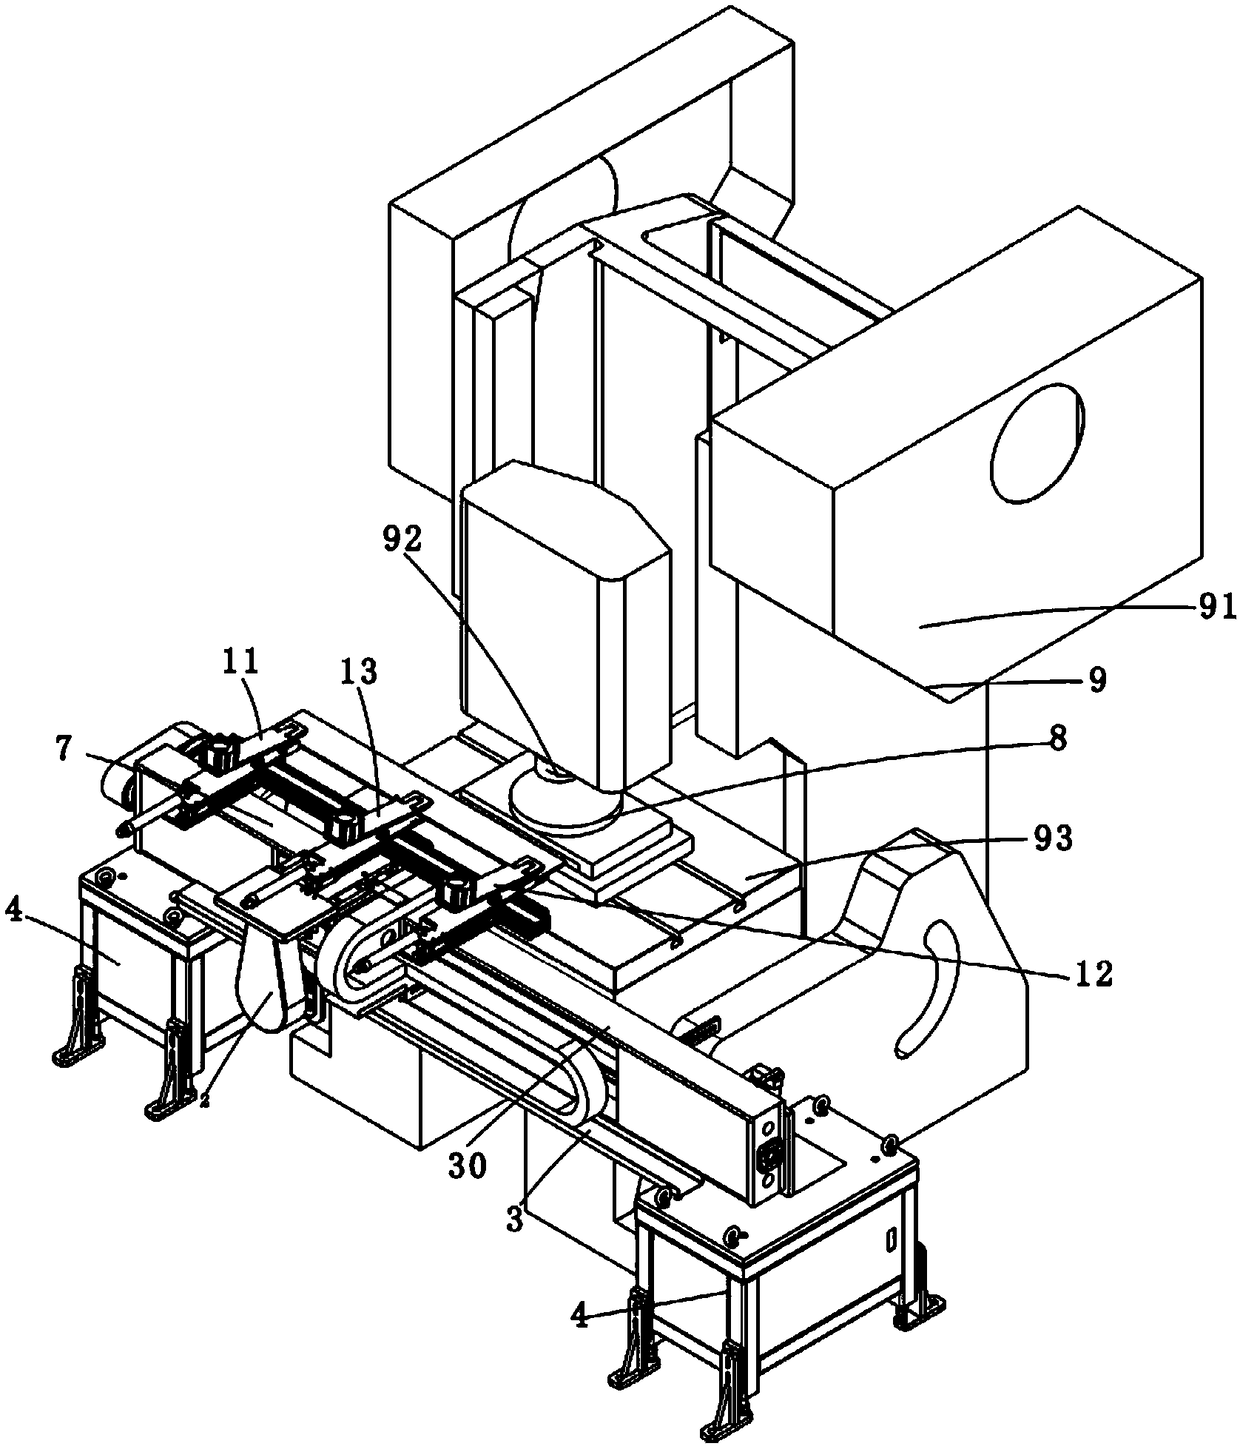 Side-punching system for short strip materials